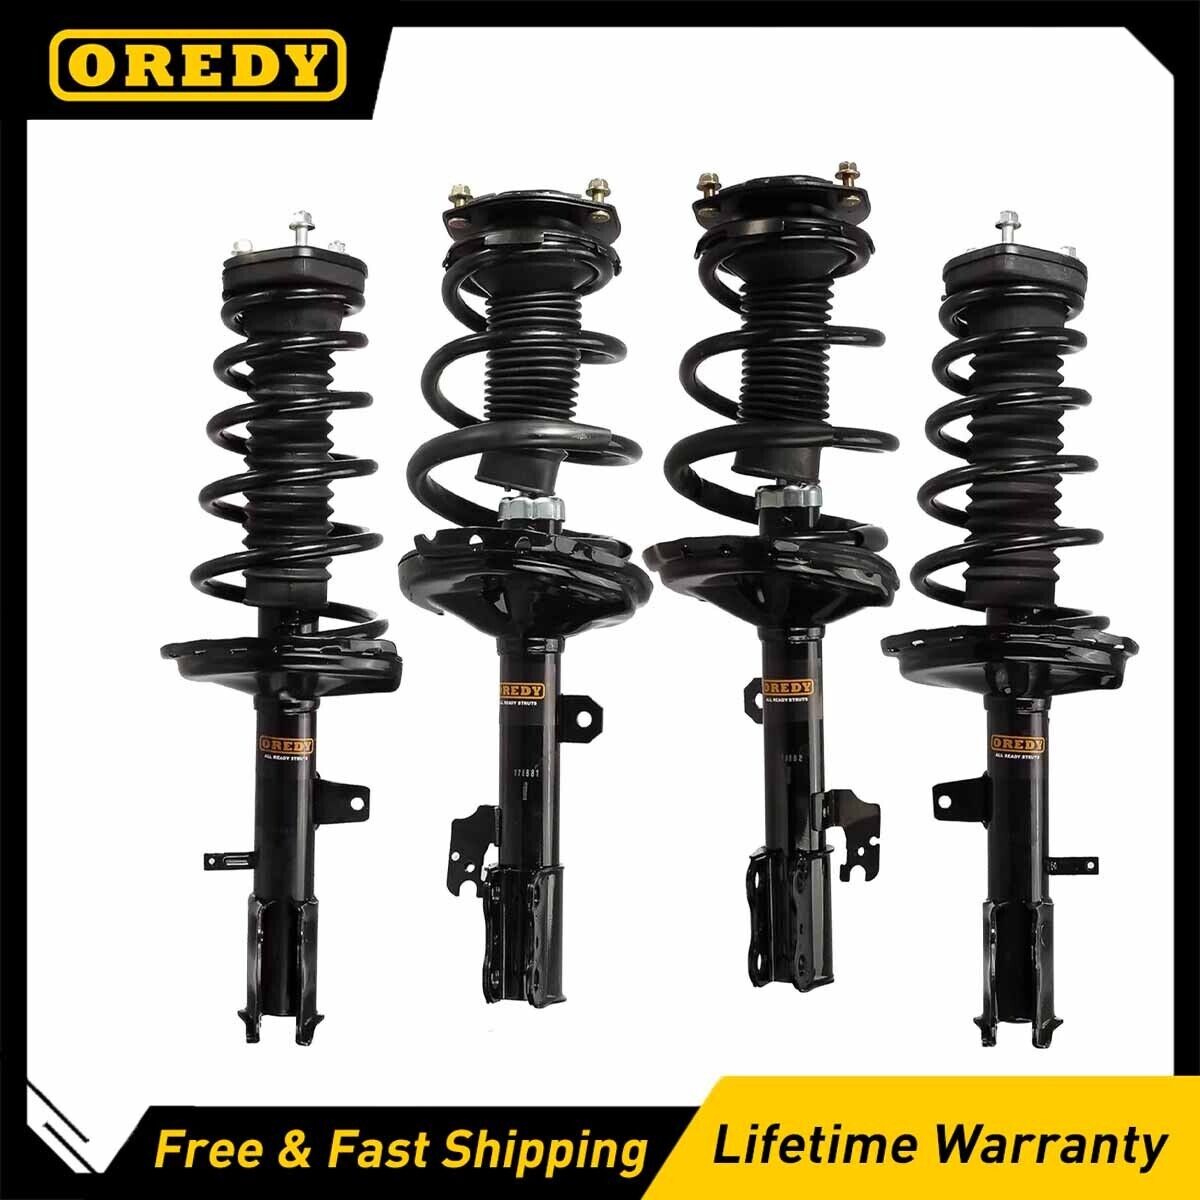 2x Front + 2x Rear Struts Replacement for 2004 - 2006 2007 AWD Toyota Highlander